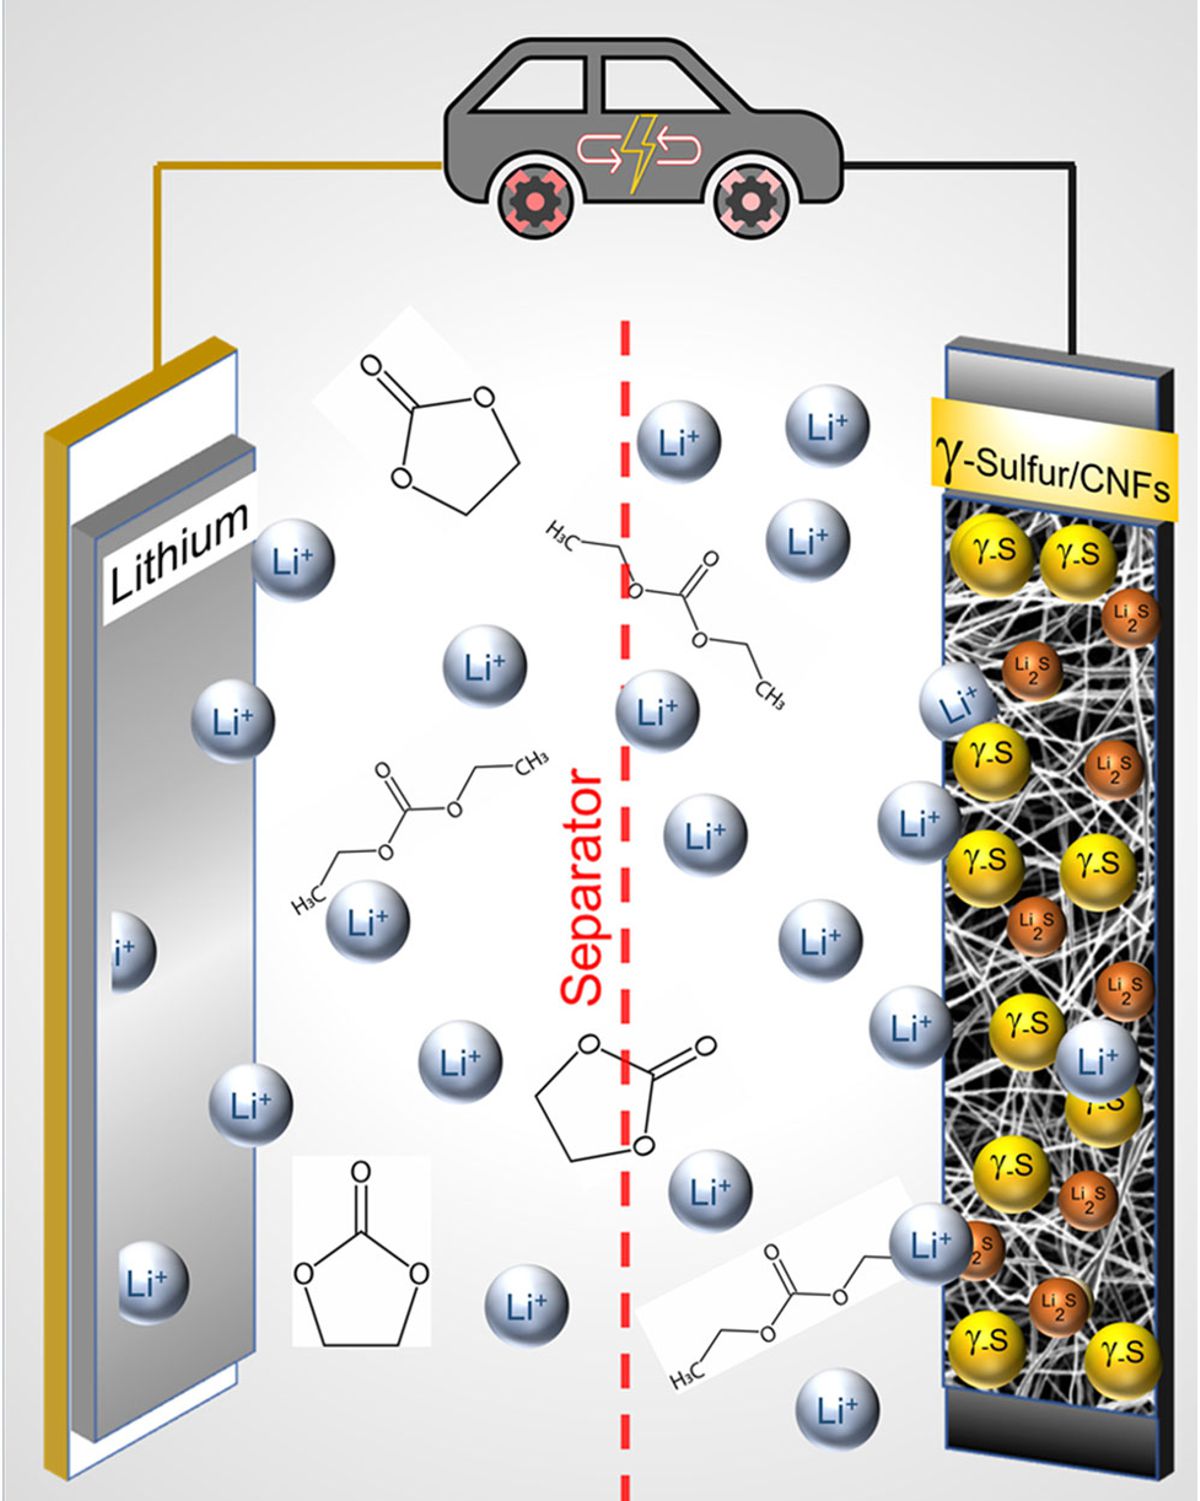 Drexel's sulfur cathode breakthrough could pave the way for better-performing and sustainably sourced batteries for electric vehicles, computers and mobile devices.